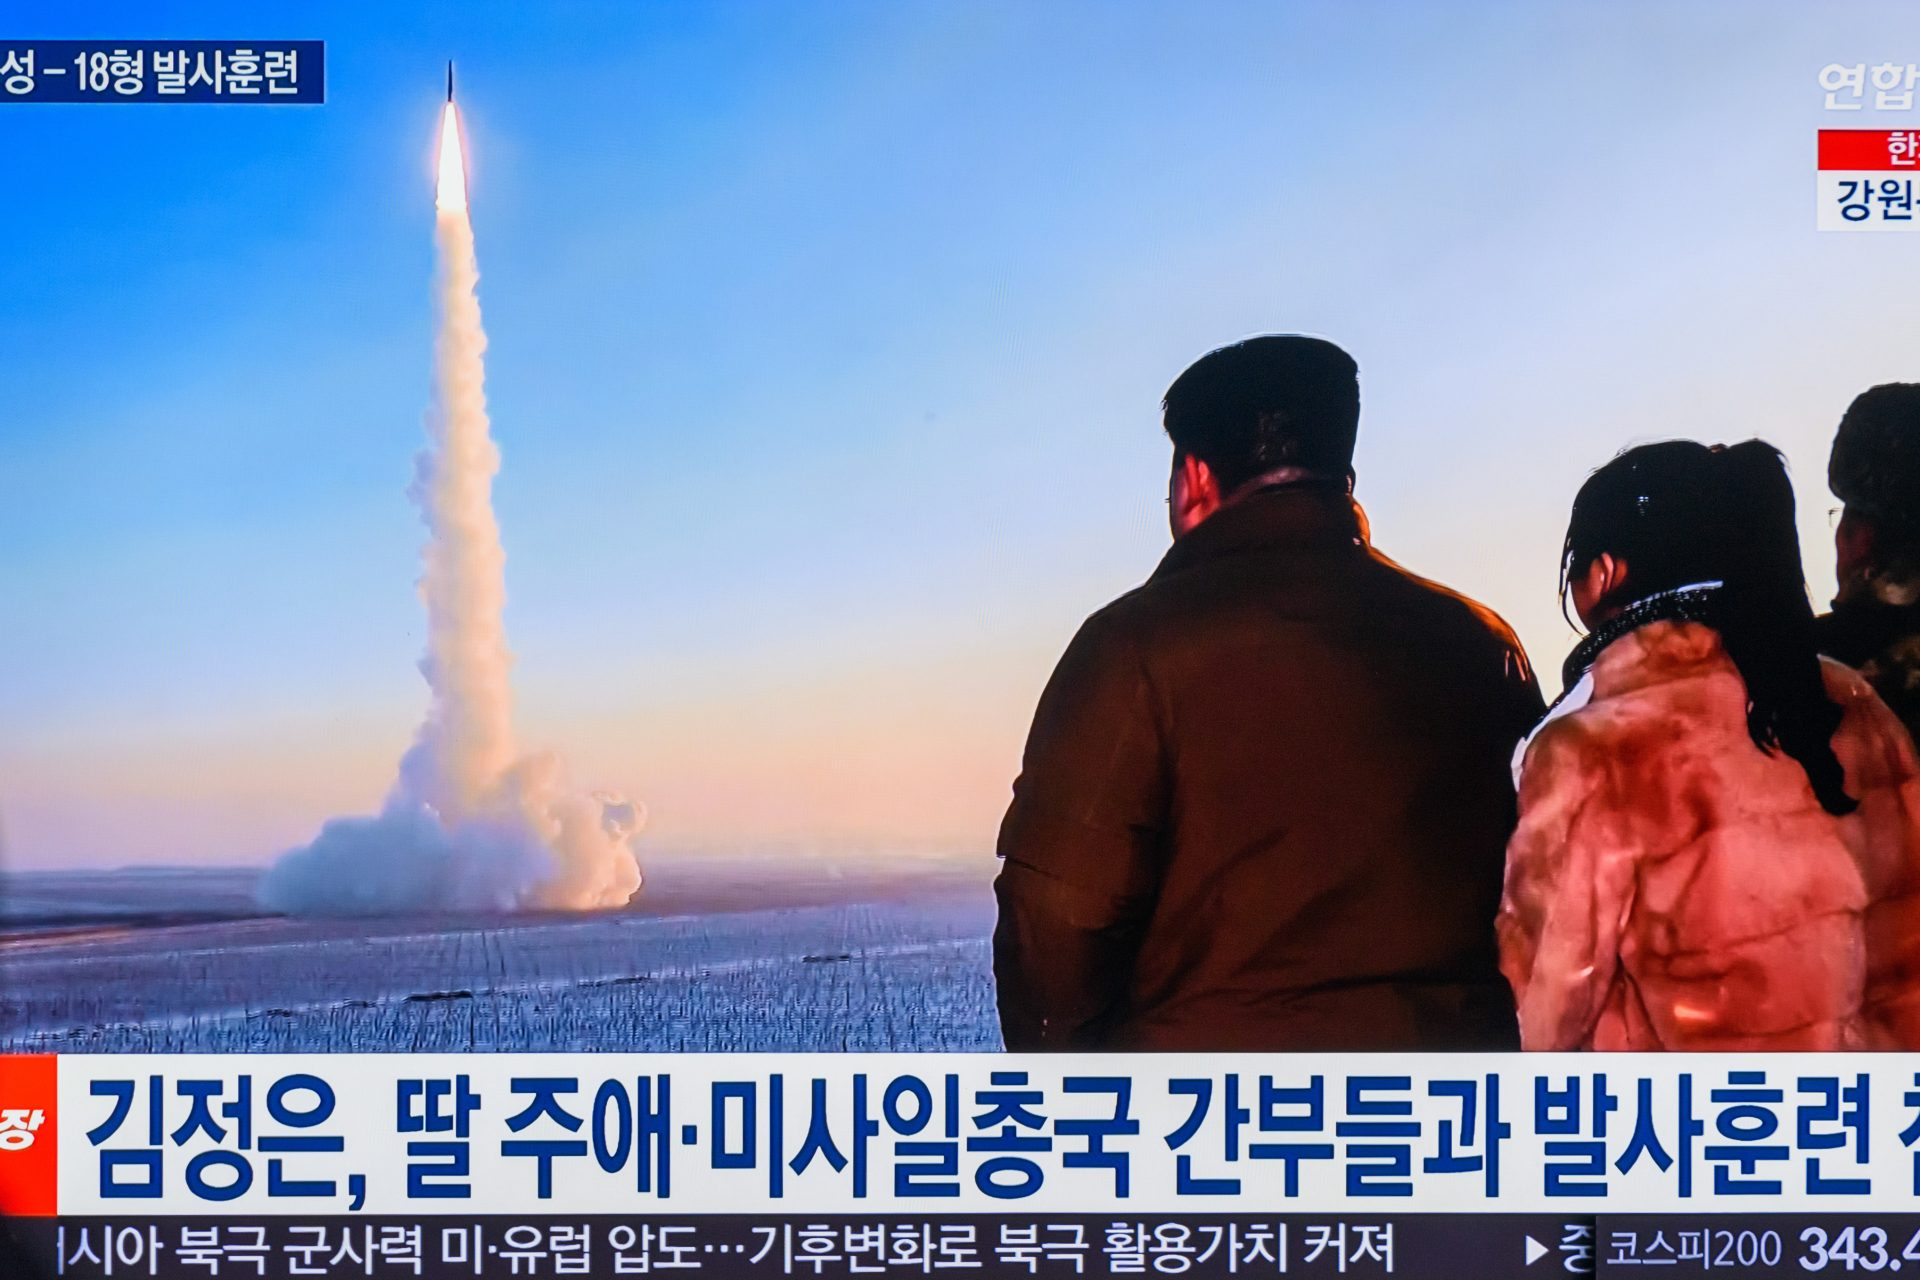 North Korea’s missile program is costly 